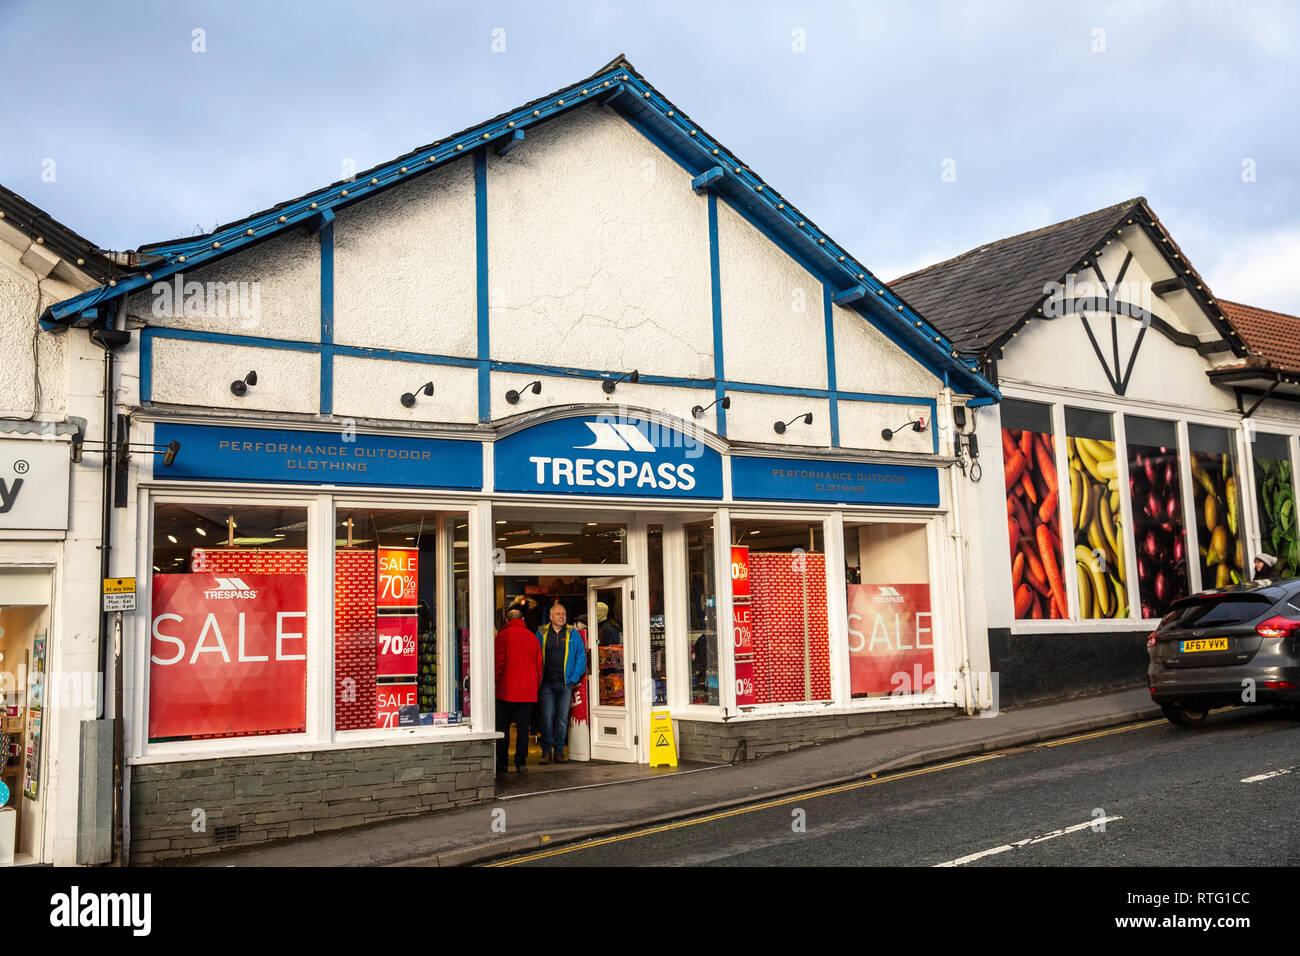 Trespass outdoor clothing store with january sales promoted, Bowness on Windermere in the Lake District,Cumbria,England Stock Photo